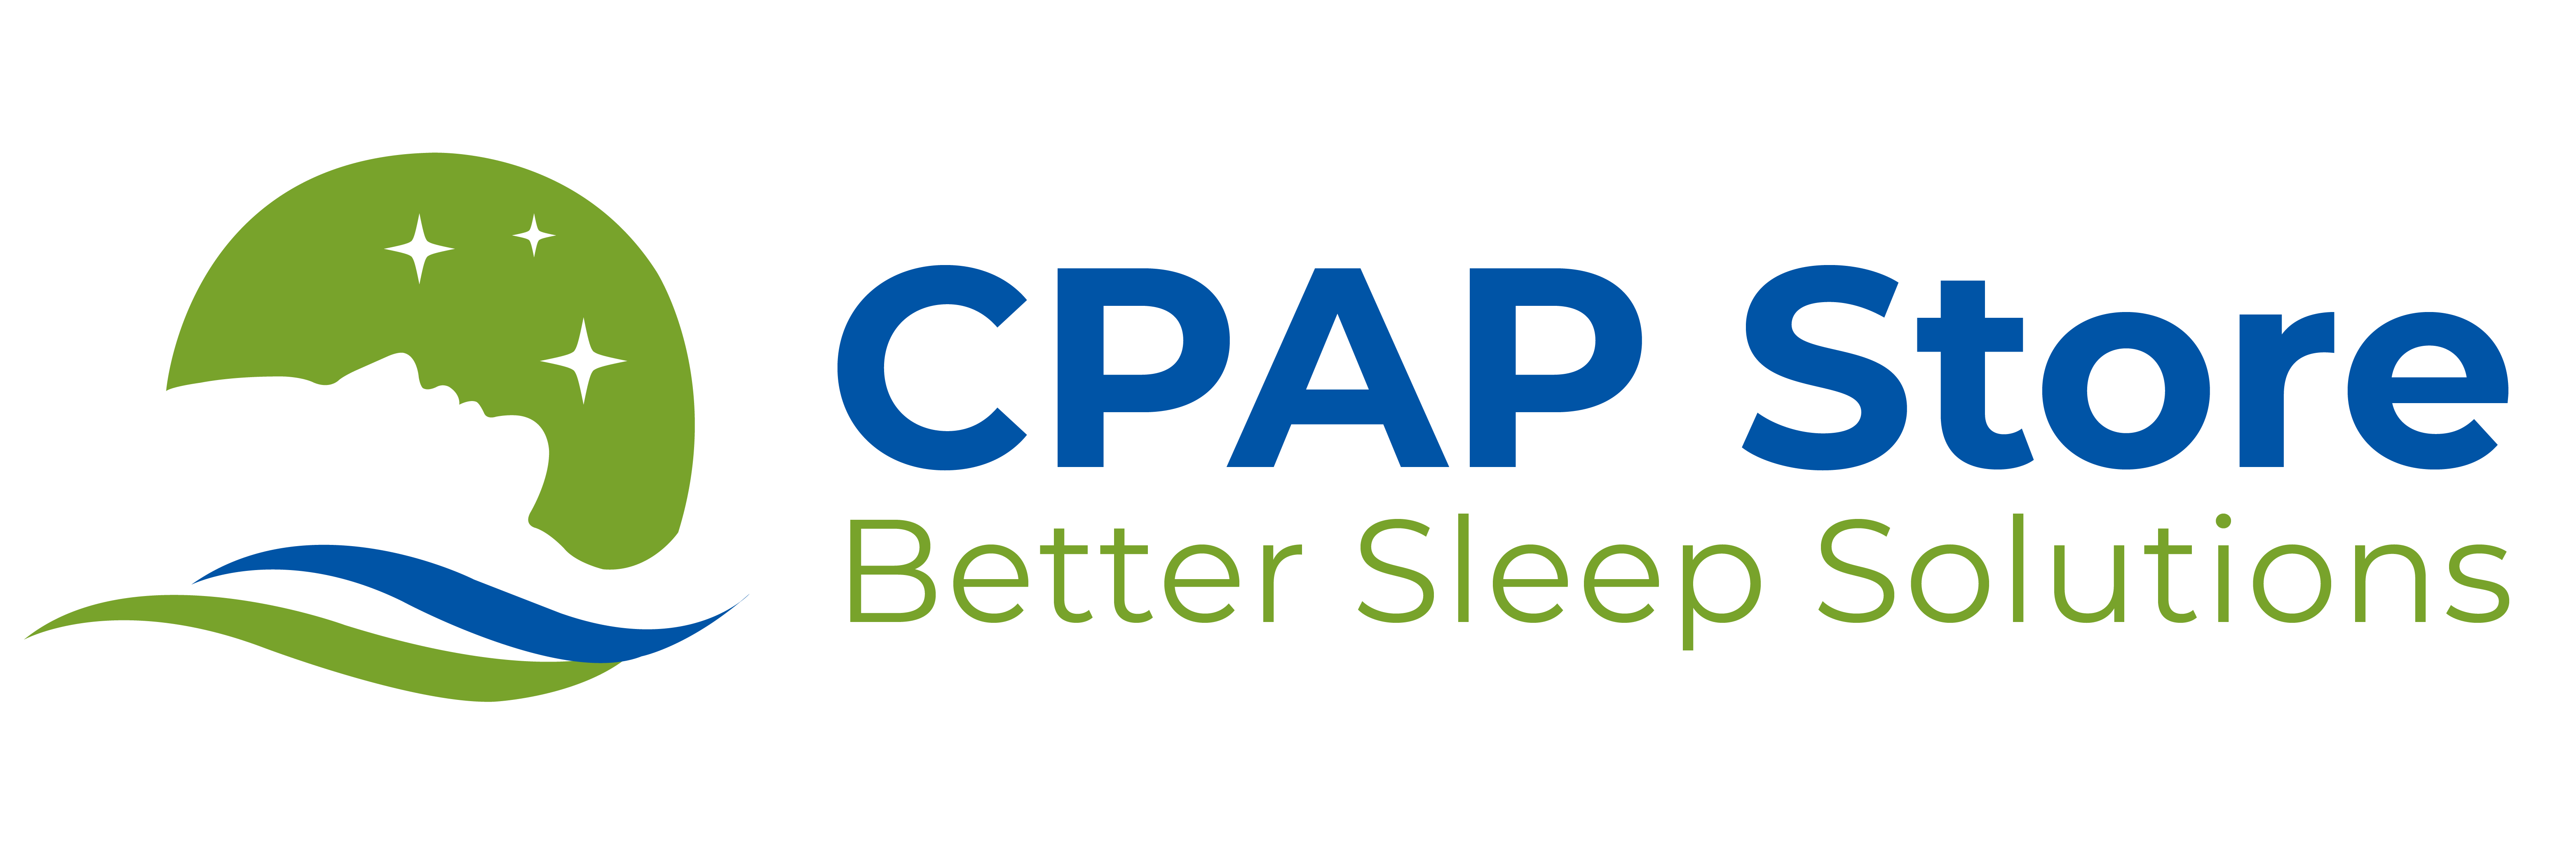 CPAP Store